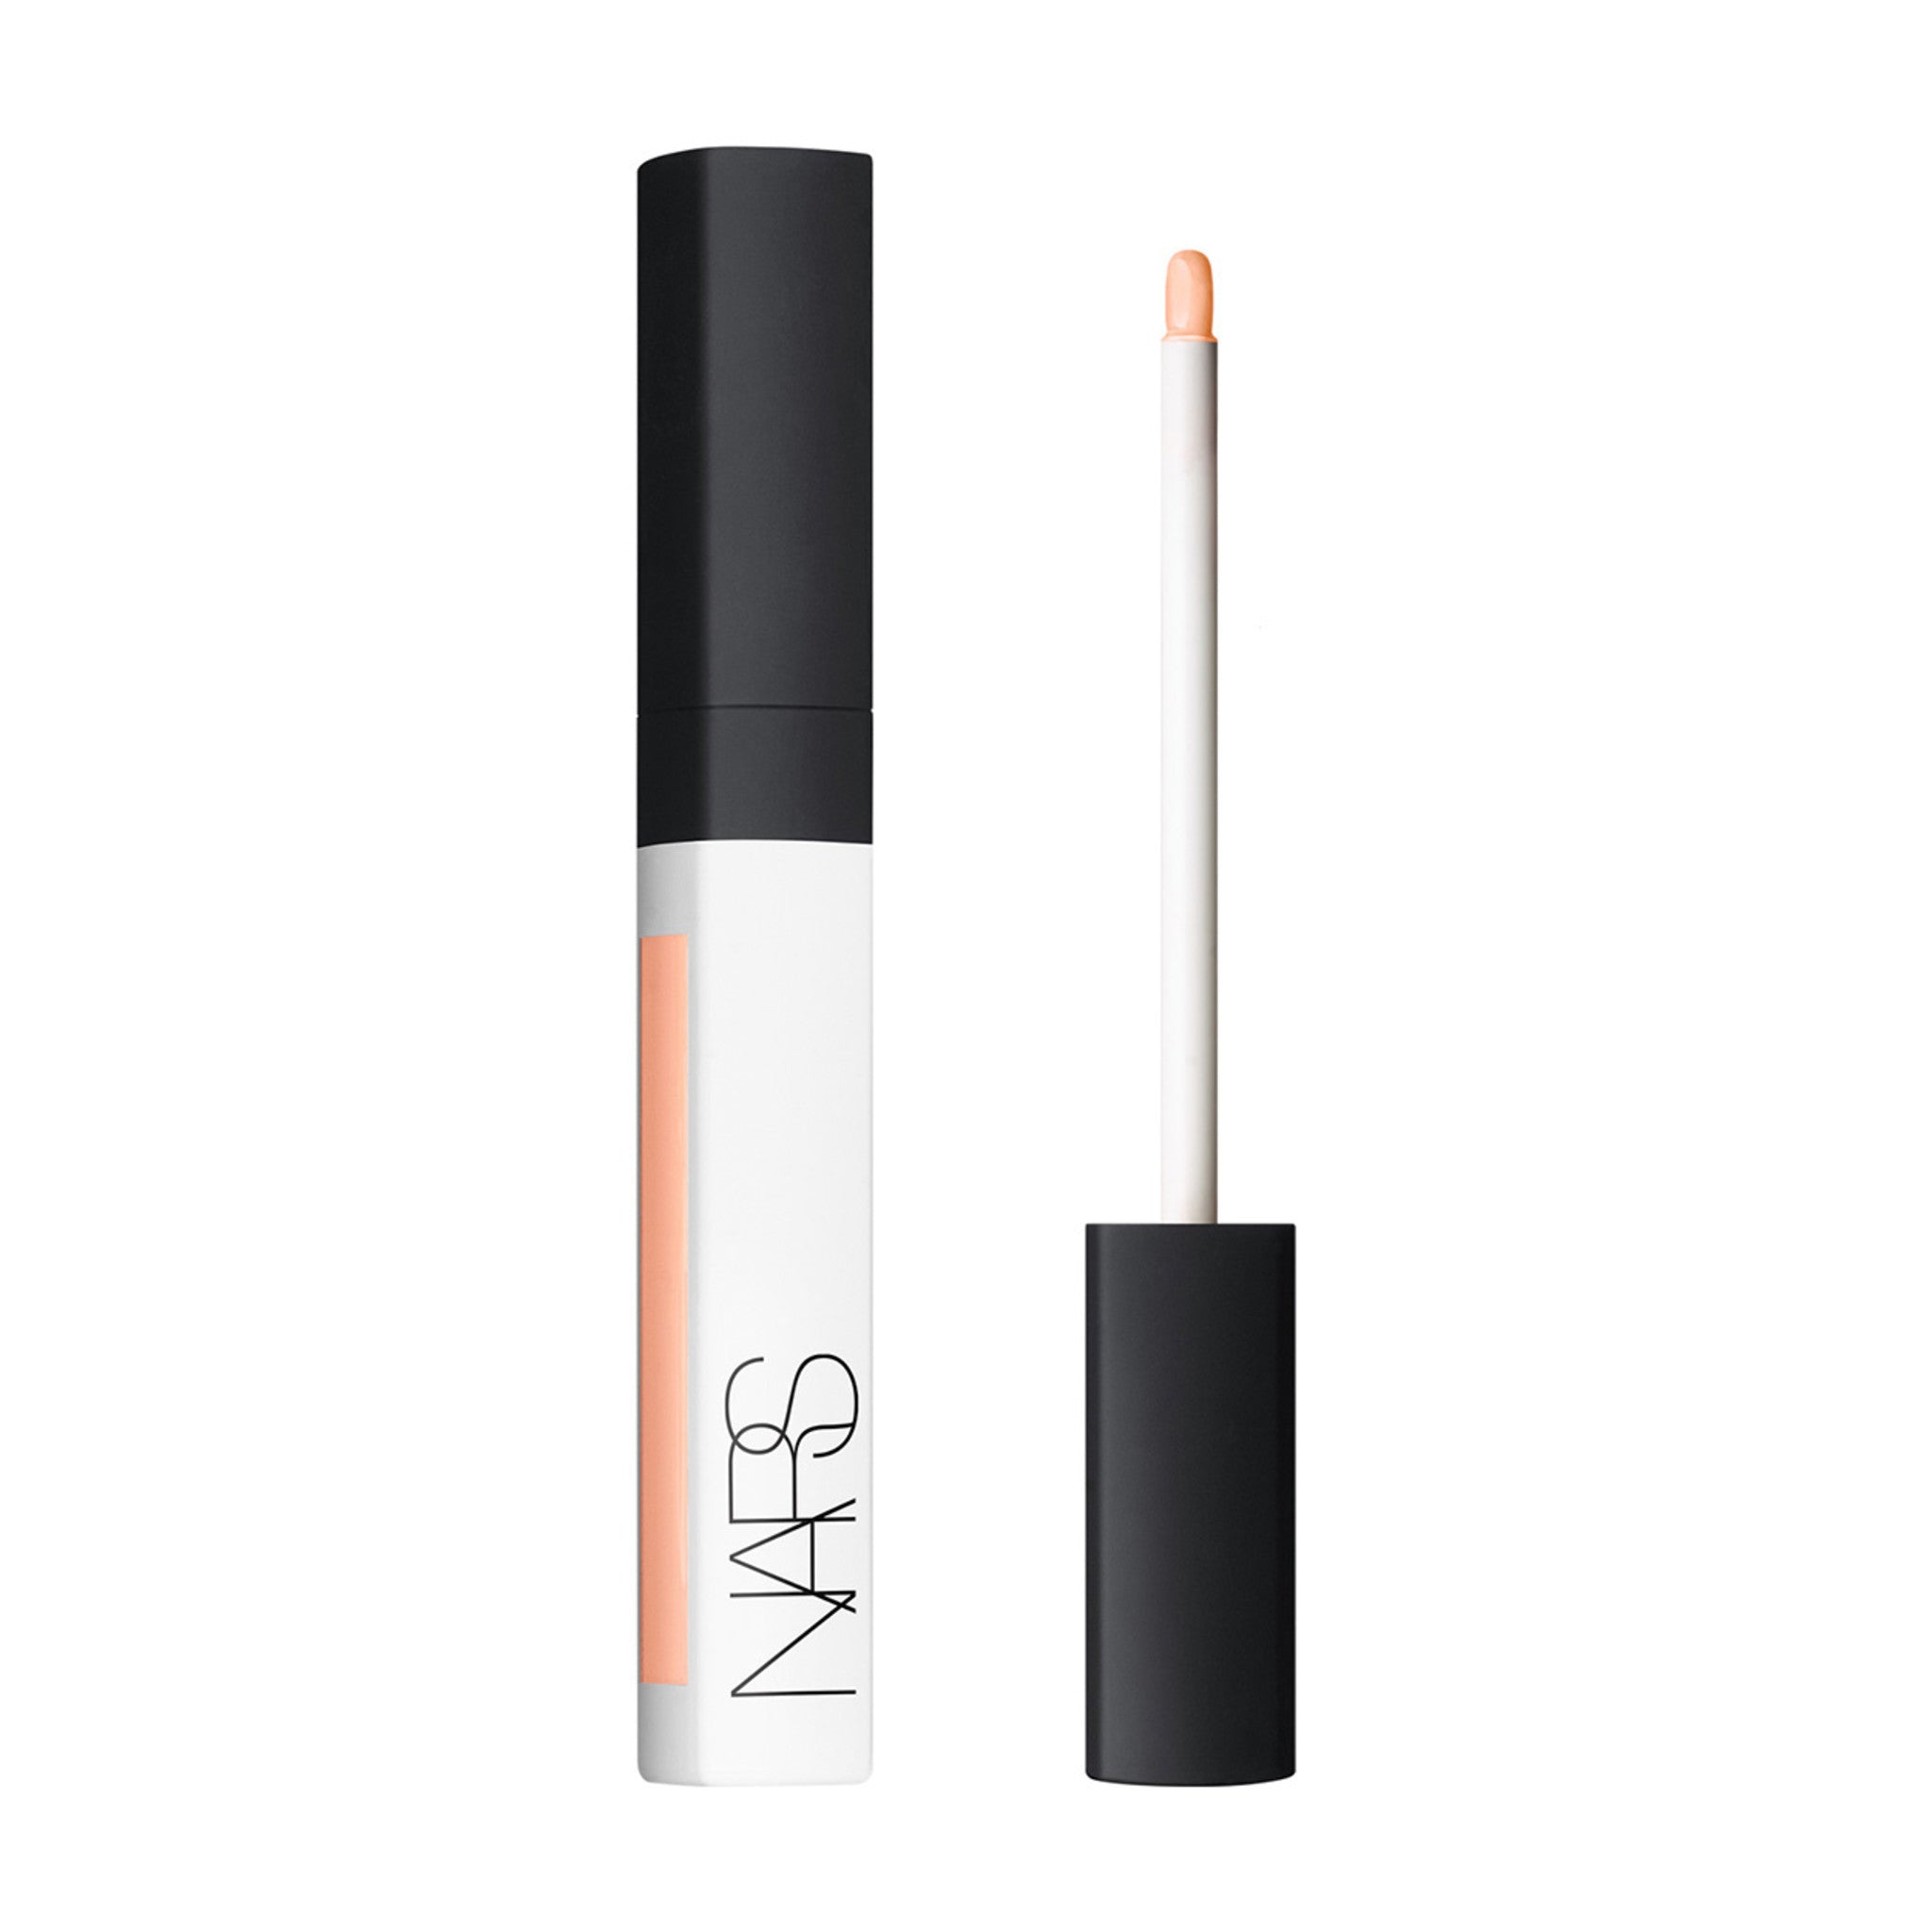 Nars Radiant Creamy Color Corrector Color/Shade variant: Light main image. This product is for light complexions